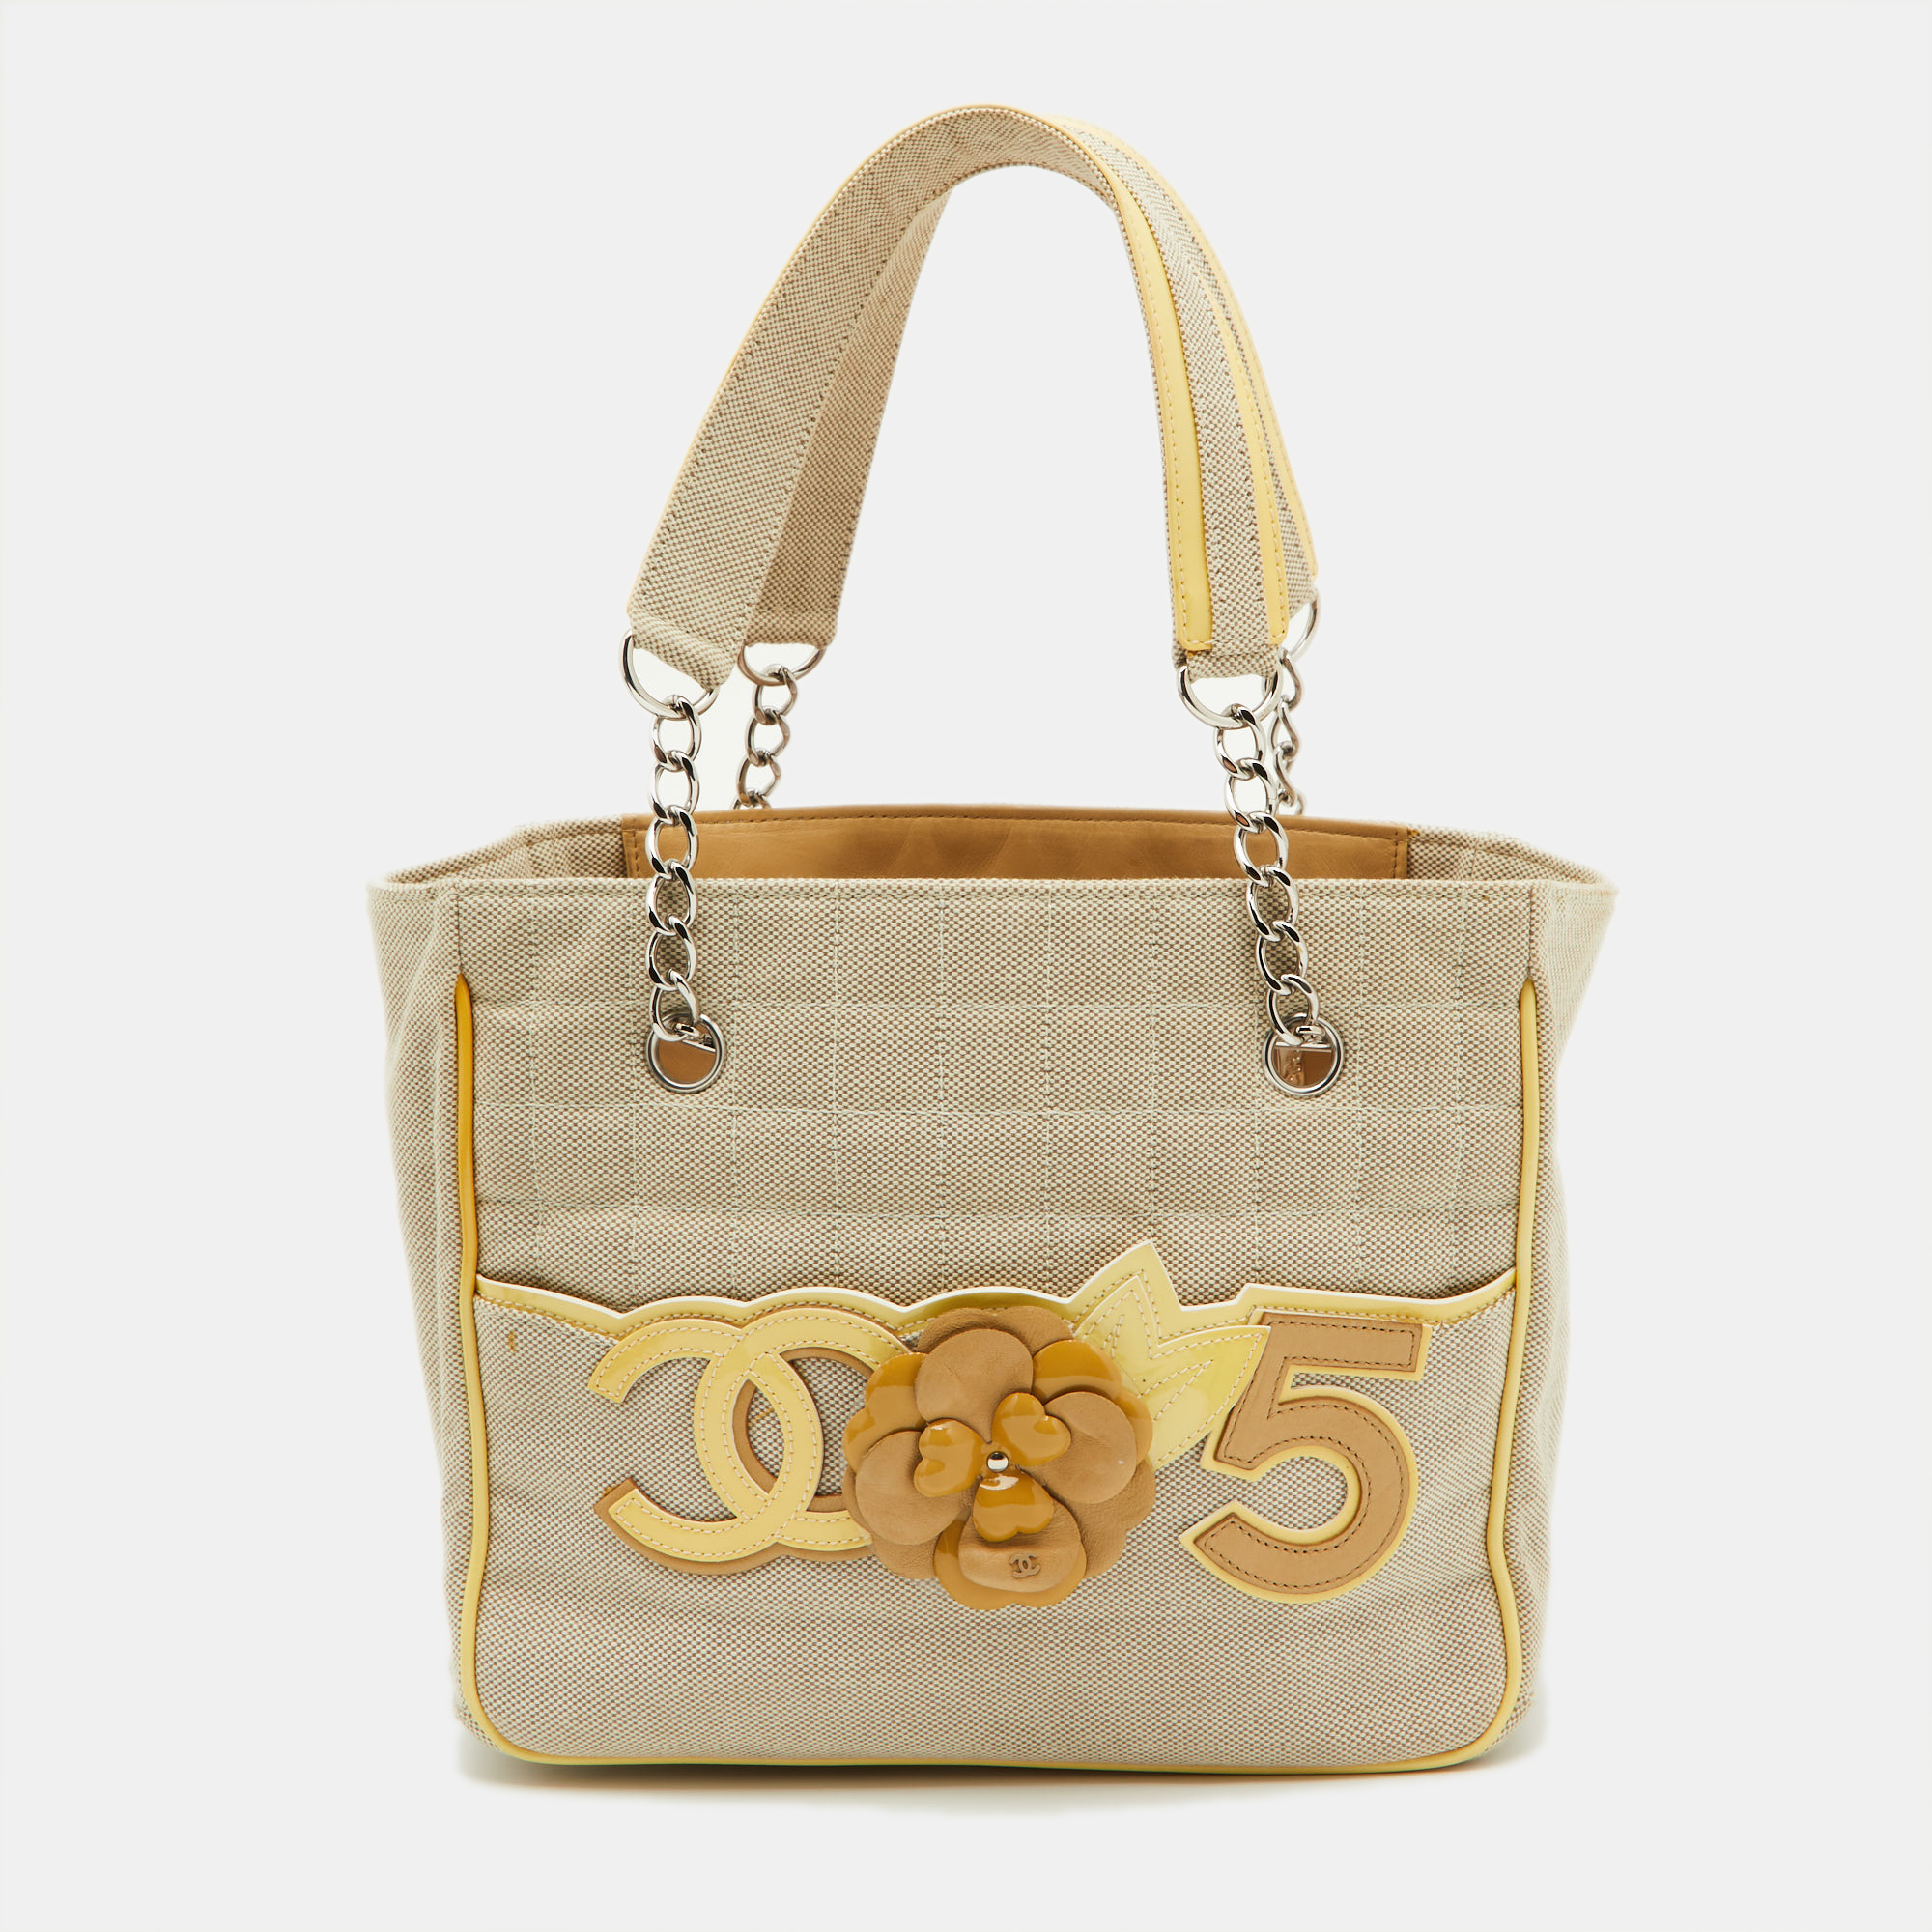 Chanel Beige/Yellow Canvas And Patent Leather Camellia No.5 Tote